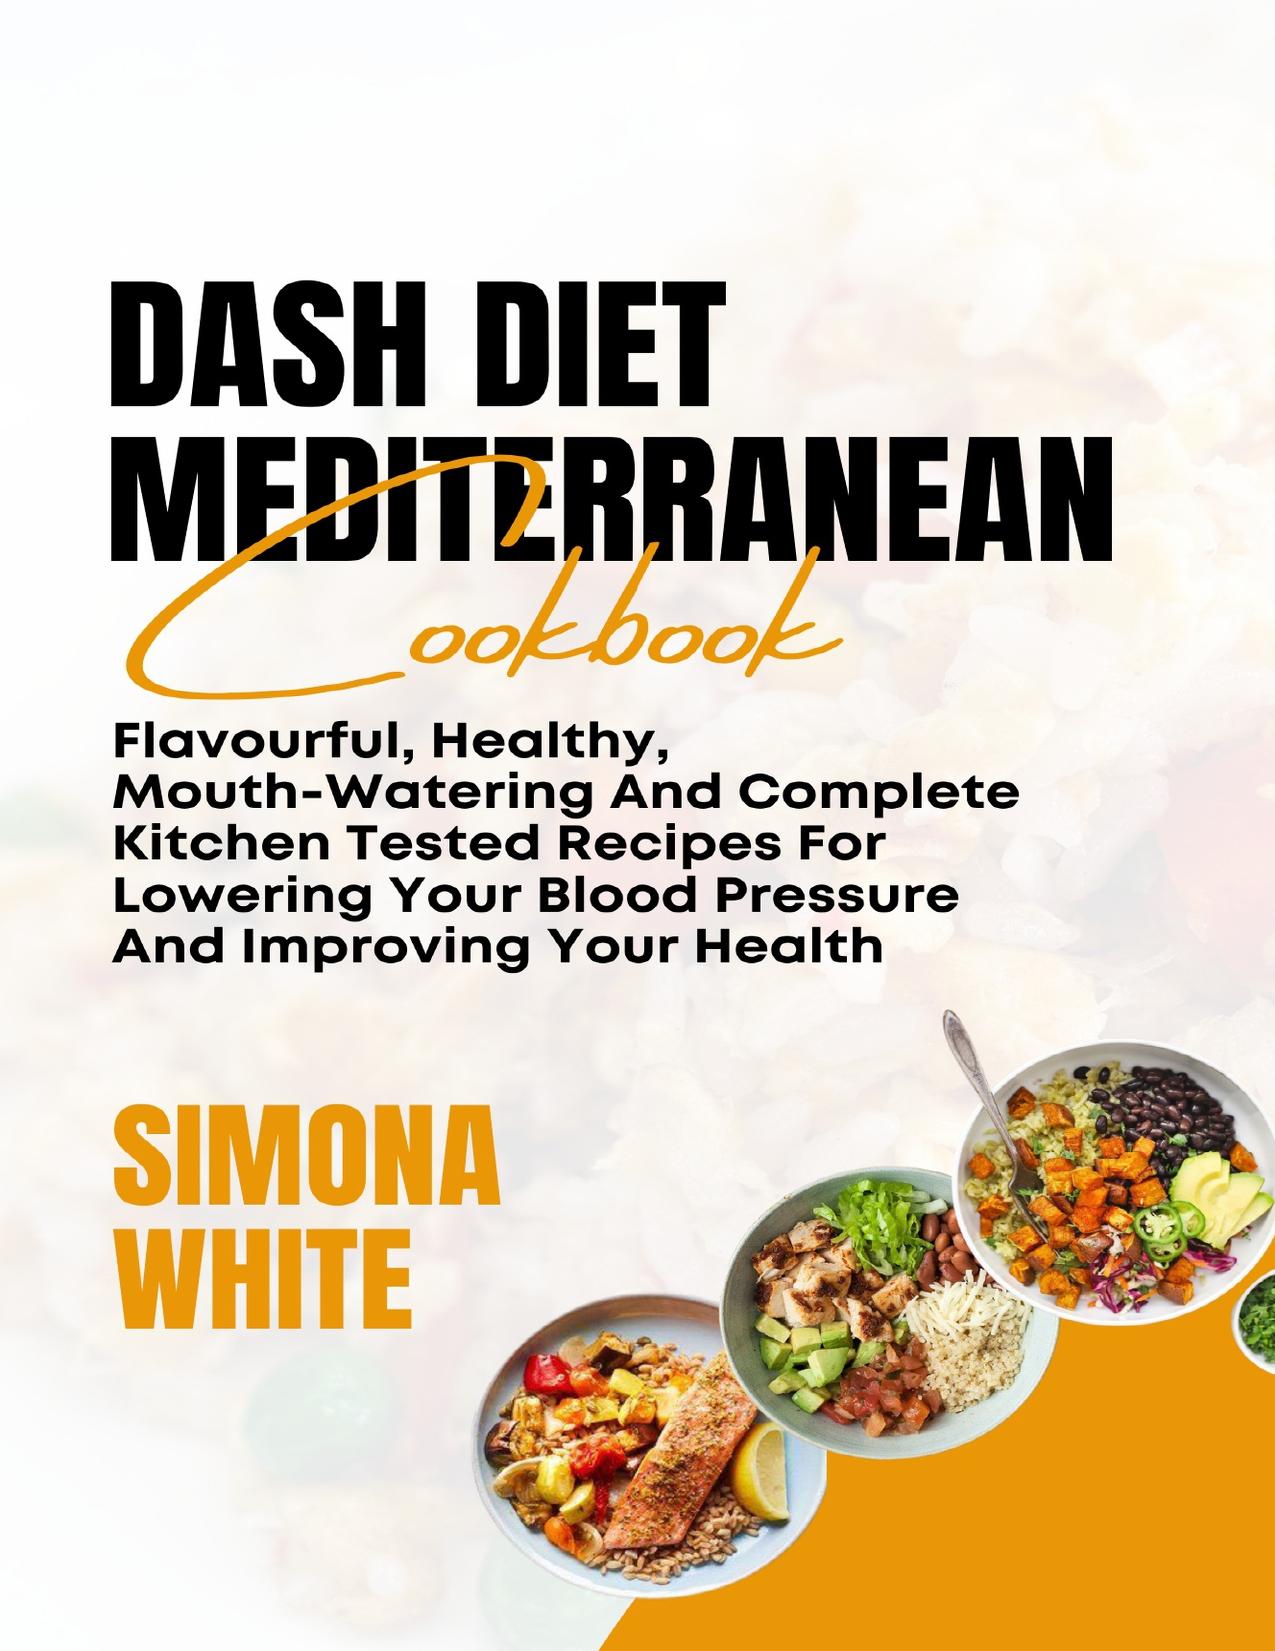 DASH DIET MEDITERRANEAN COOKBOOK: Flavorful, Healthy, Mouth-Watering And Complete Kitchen Tested Recipes For Lowering Your Blood Pressure And Improving Your Health by WHITE SIMONA